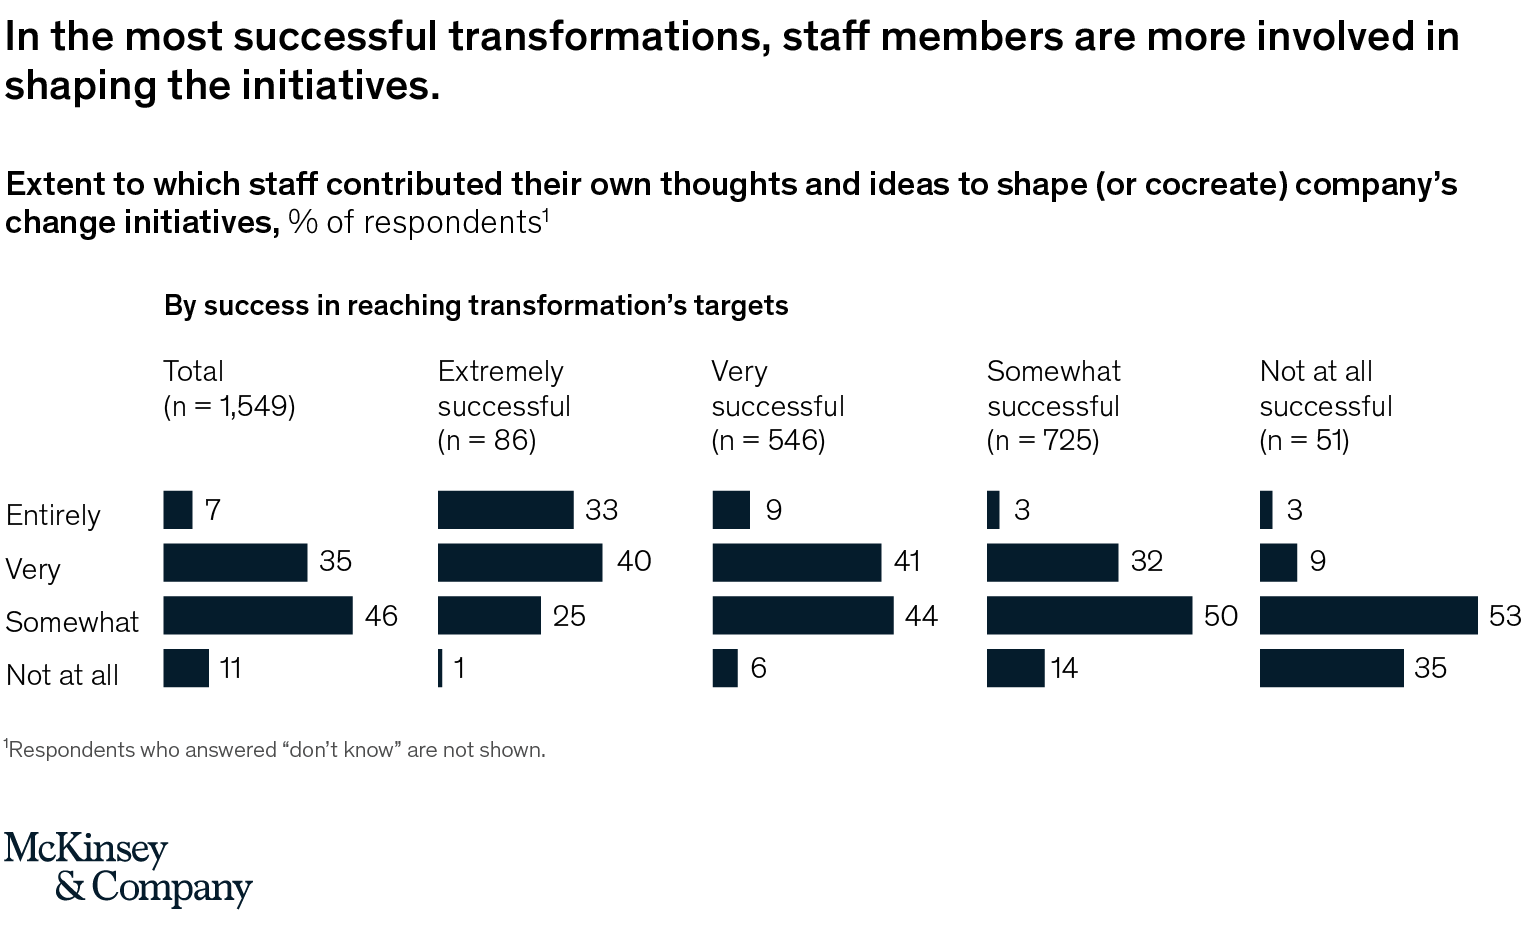 In the most successful transformations, staff members are more involved in shaping the initiatives.